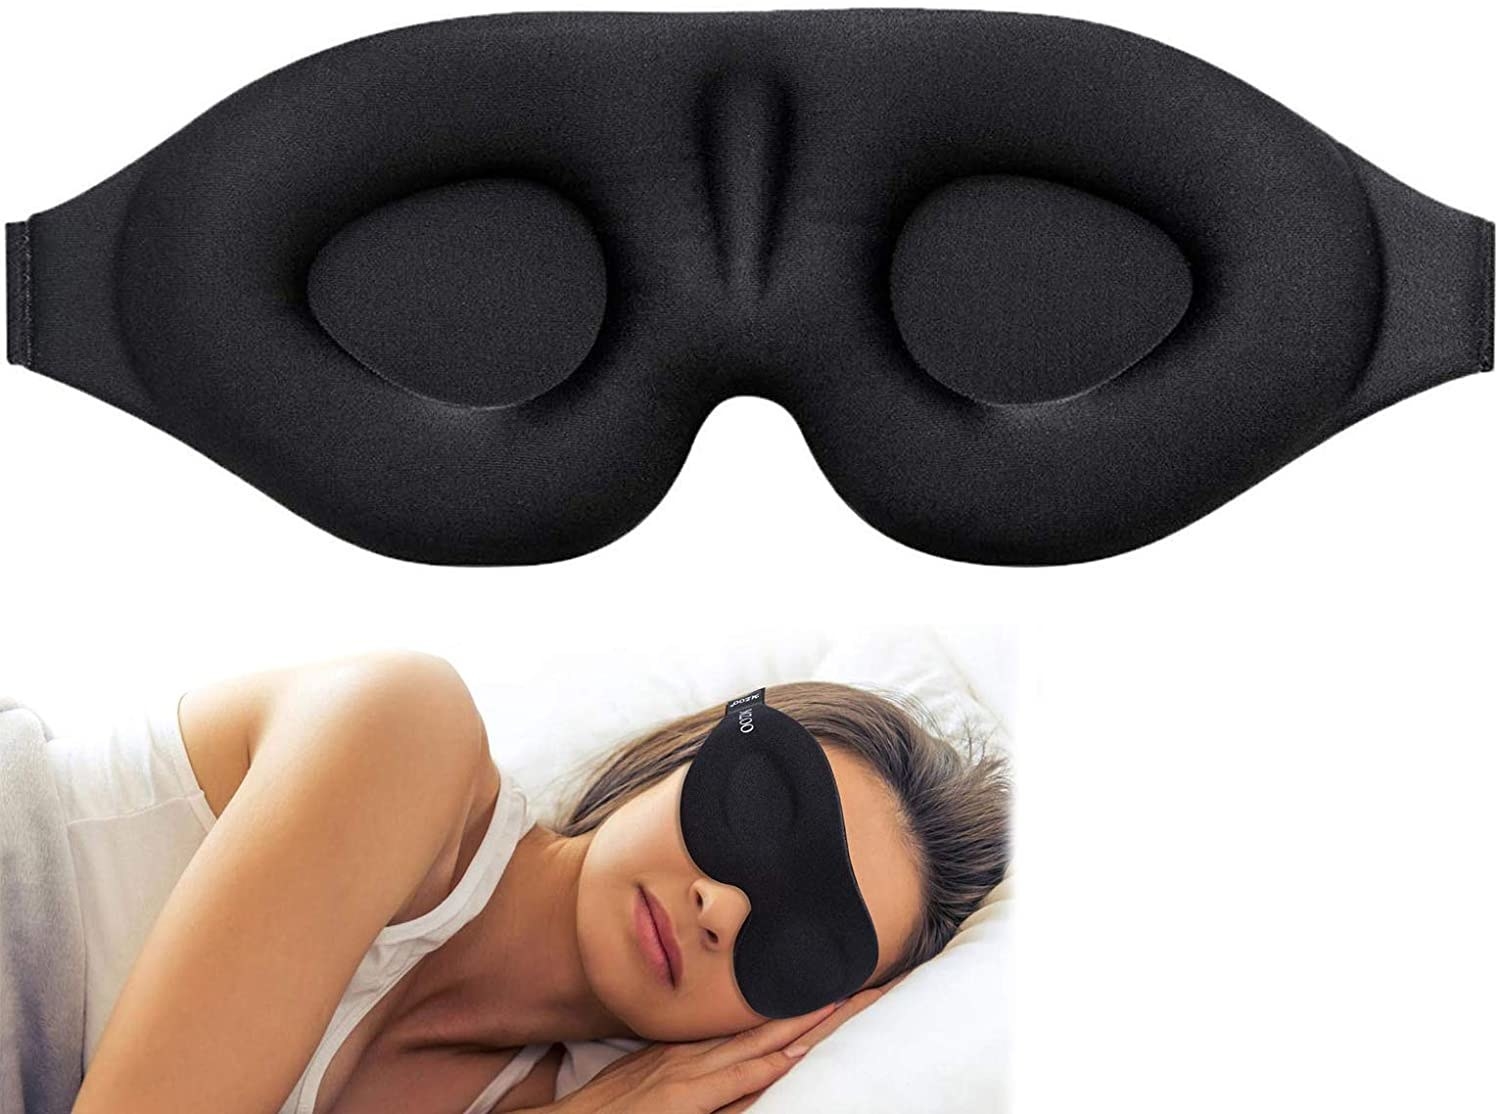 a model using the sleep mask with eye contours